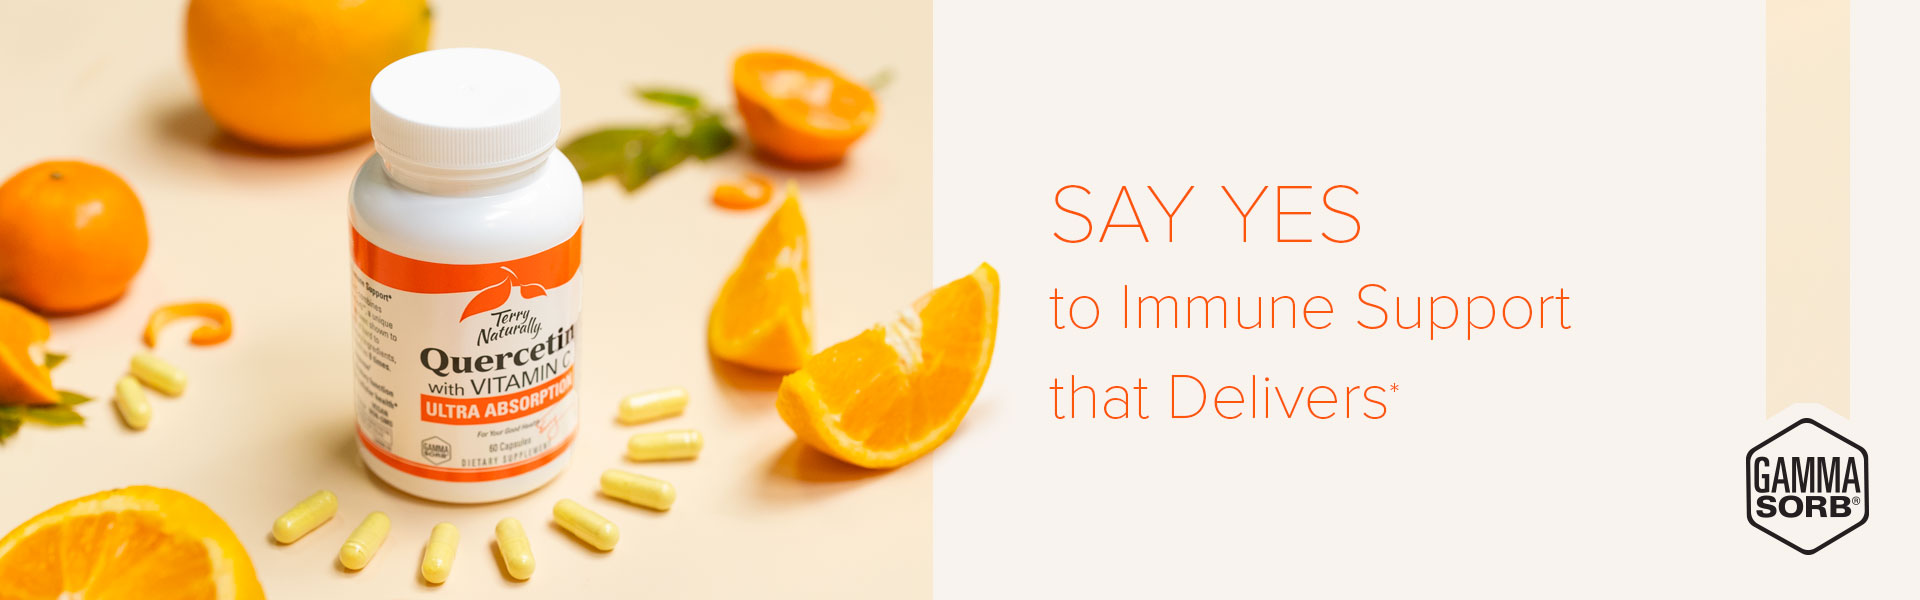 SAY YES to Immune Support that Delivers*